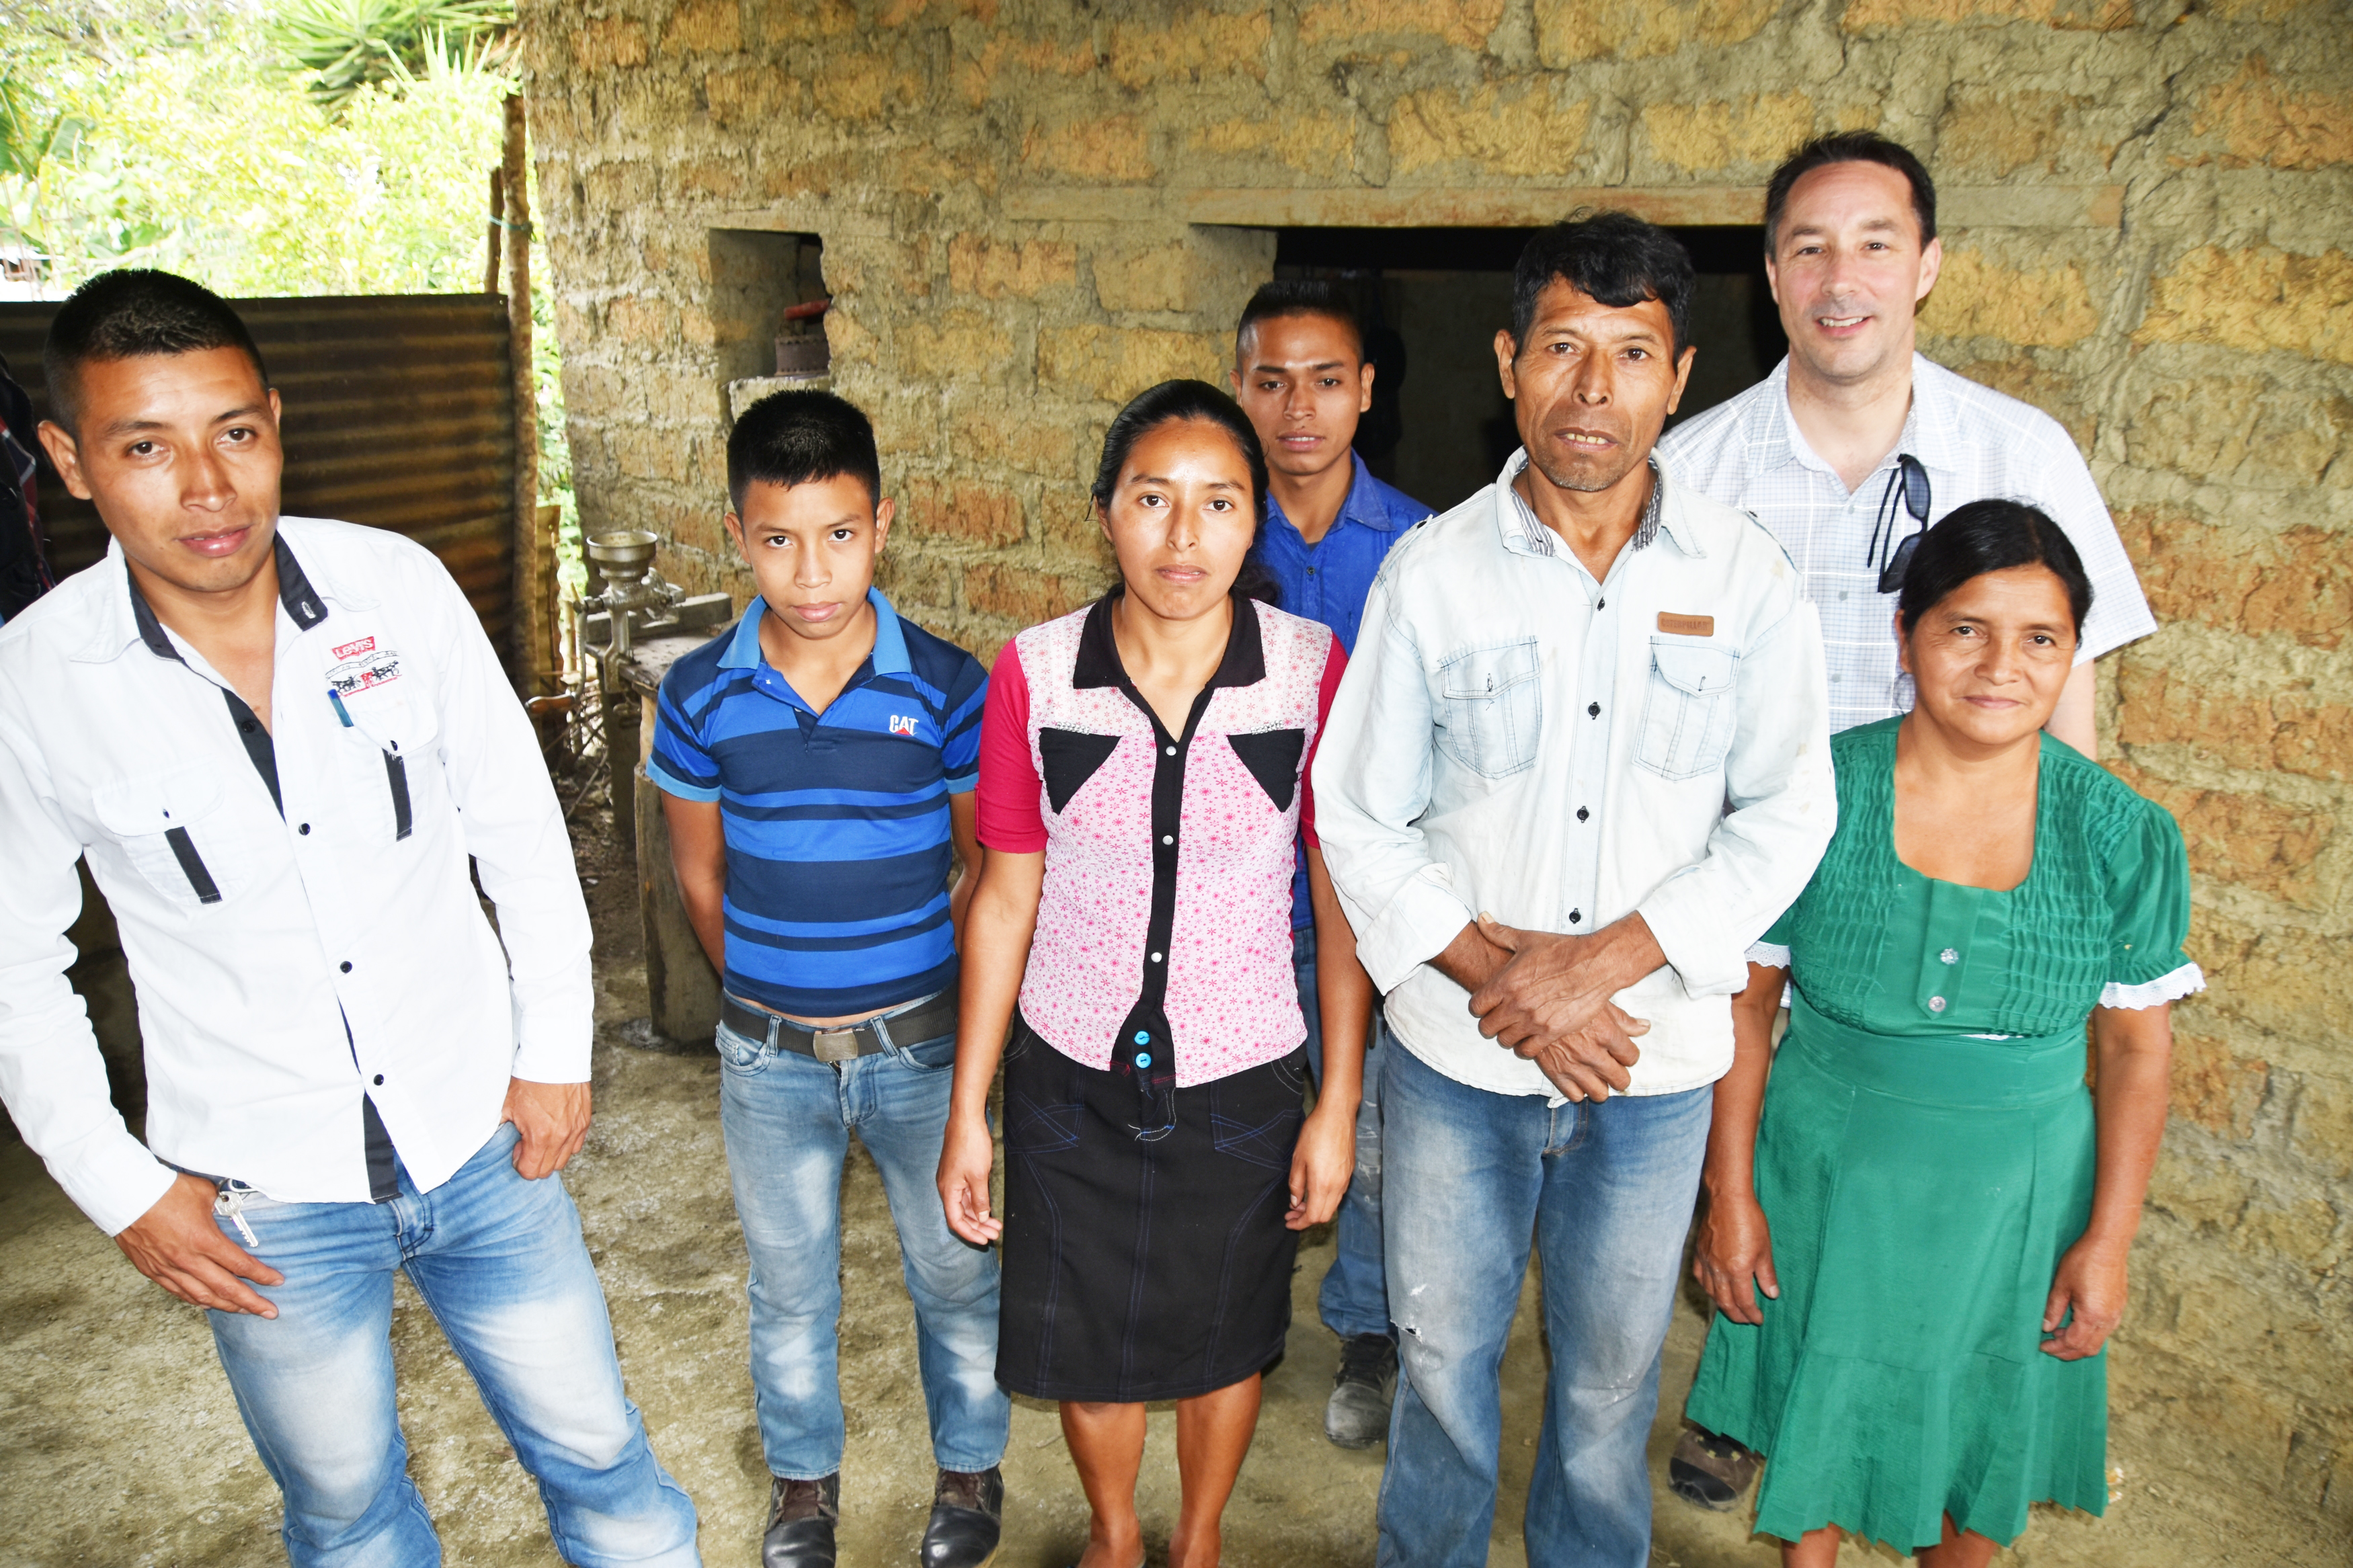 Pastor Steve Wheeler with a family in Guatemala